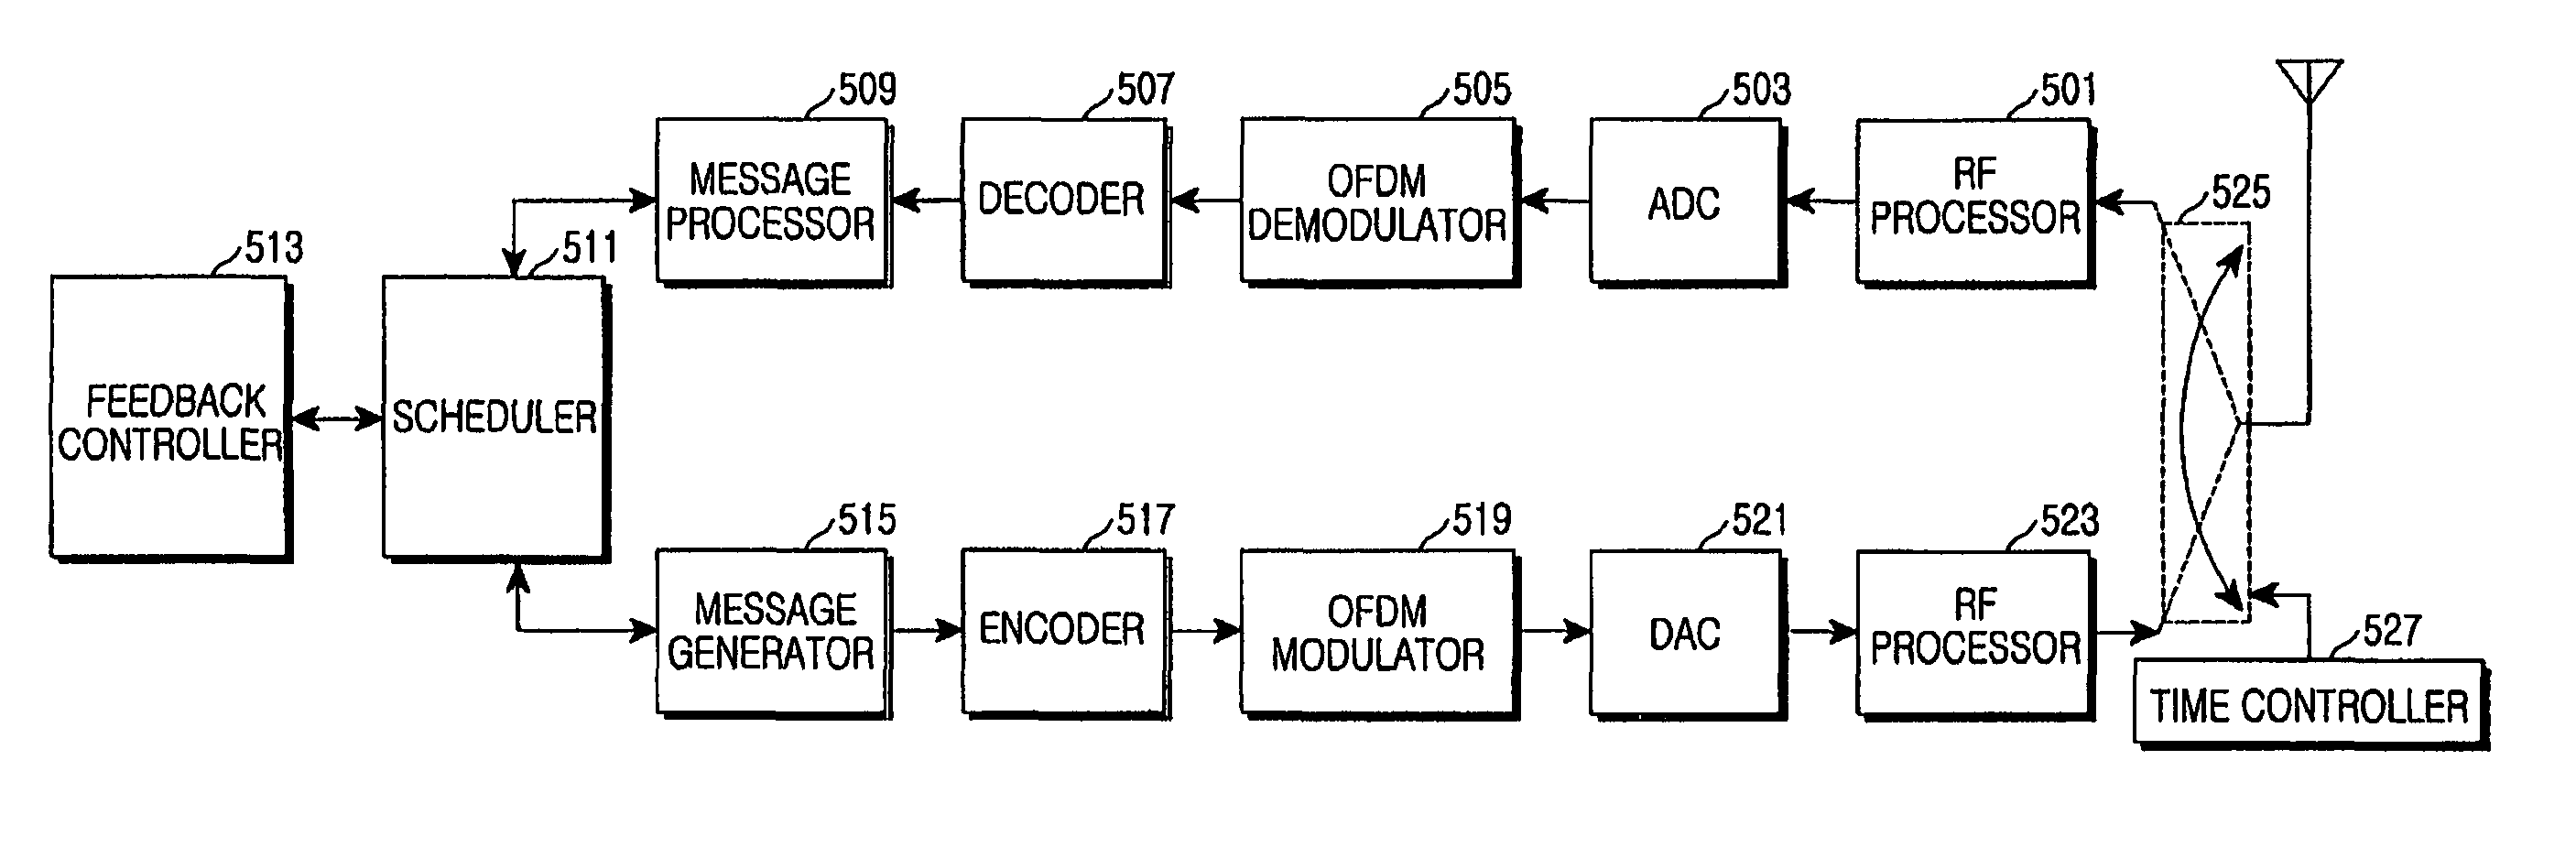 Apparatus and method for operating feedback channels in a wireless communication system